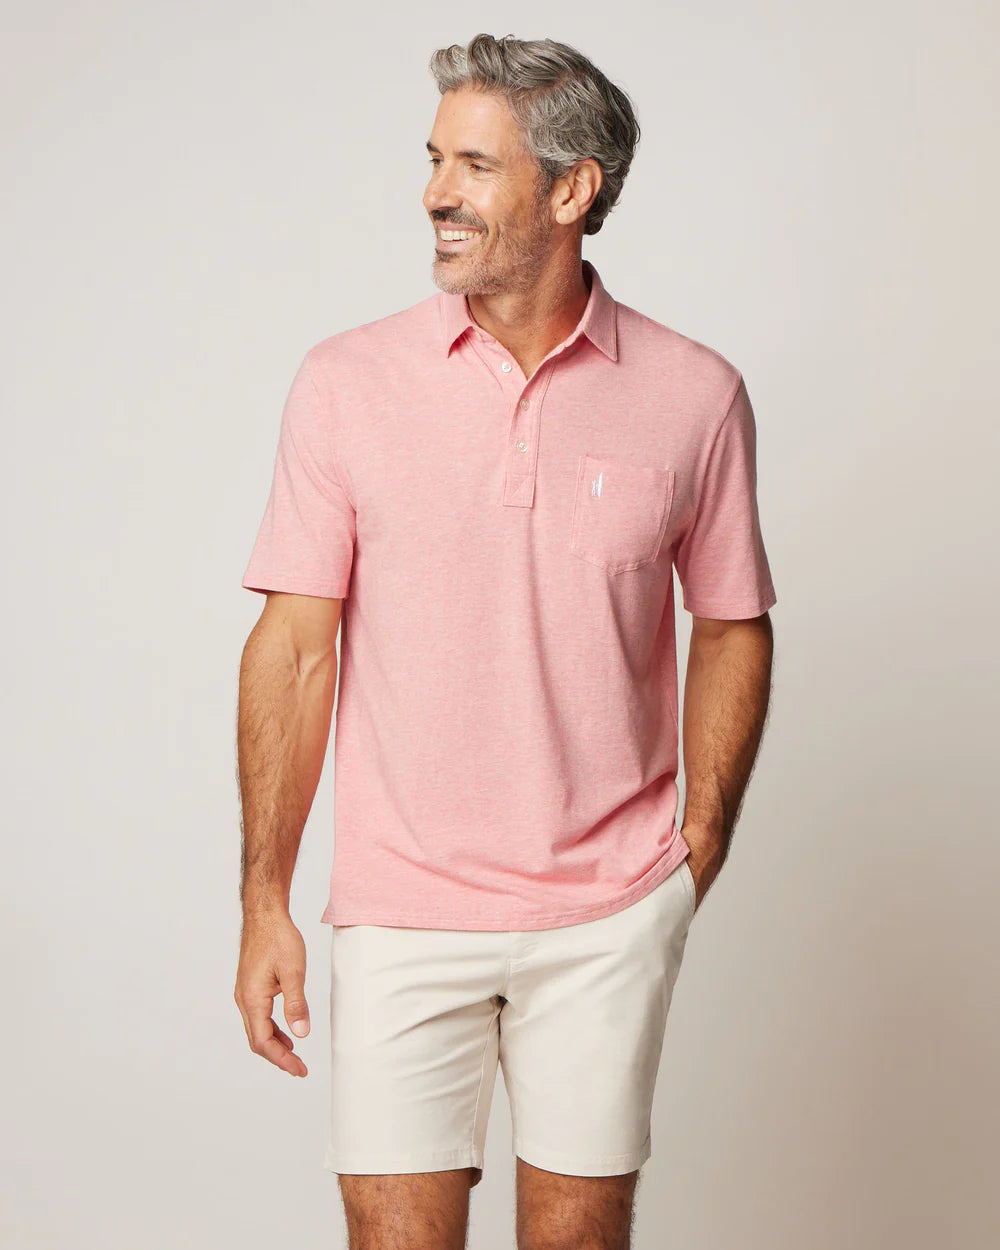 Our new Heathered Original 2.0 features a cotton, modal, and spandex fabric blend that's soft to the touch, stretchy, and nearly wrinkle free. An all around polo that will become a staple in rotation, this shirt is great year round and can be worn out to dinner under a layer or on it's own out in the sun.